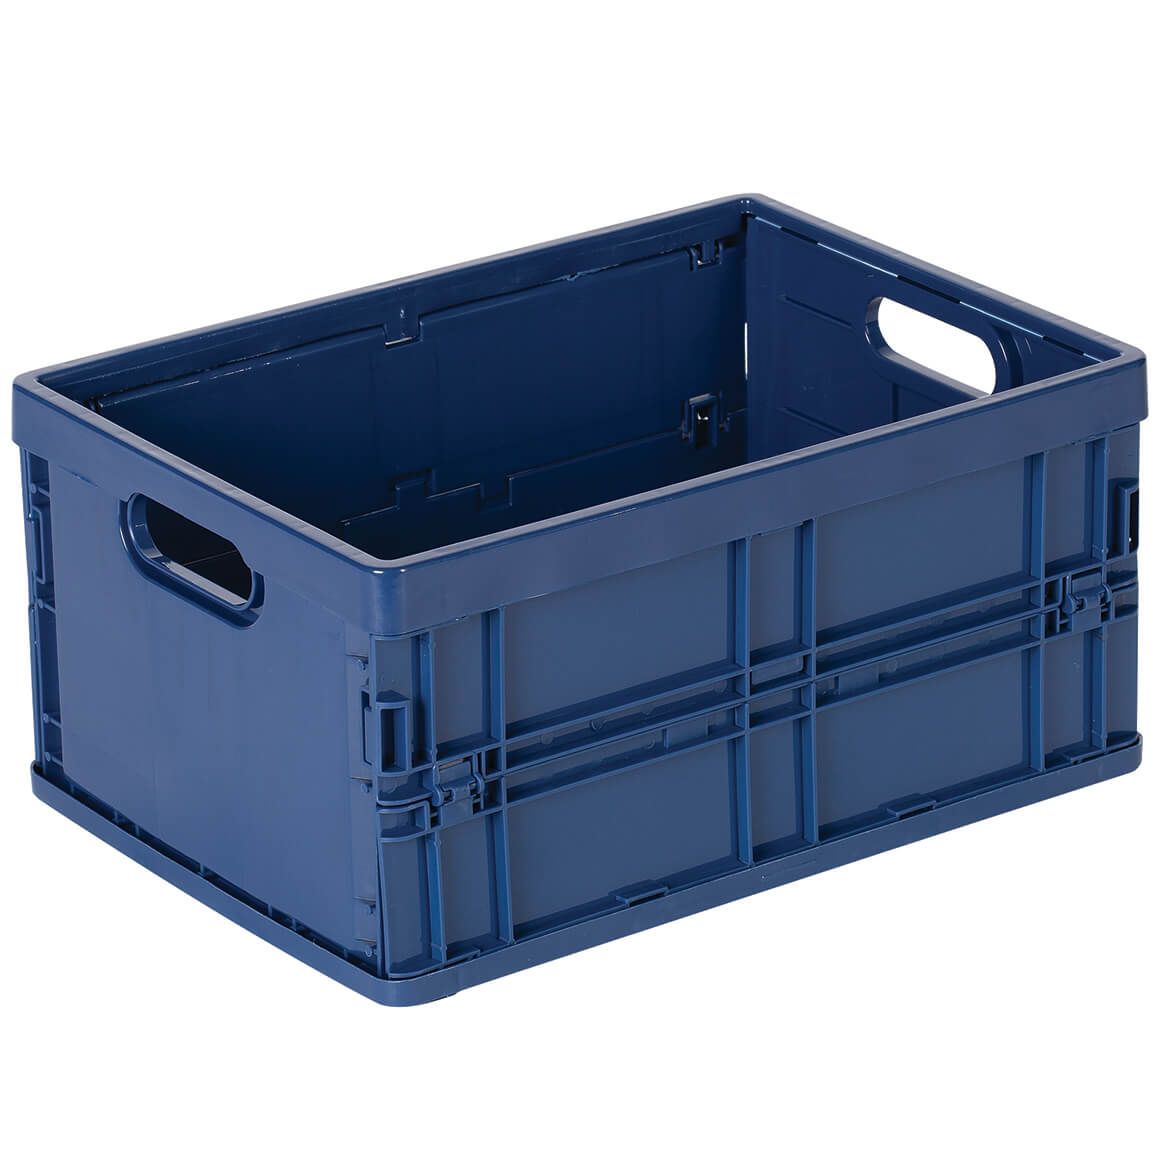 Blue Collapsible Crate + '-' + 376190